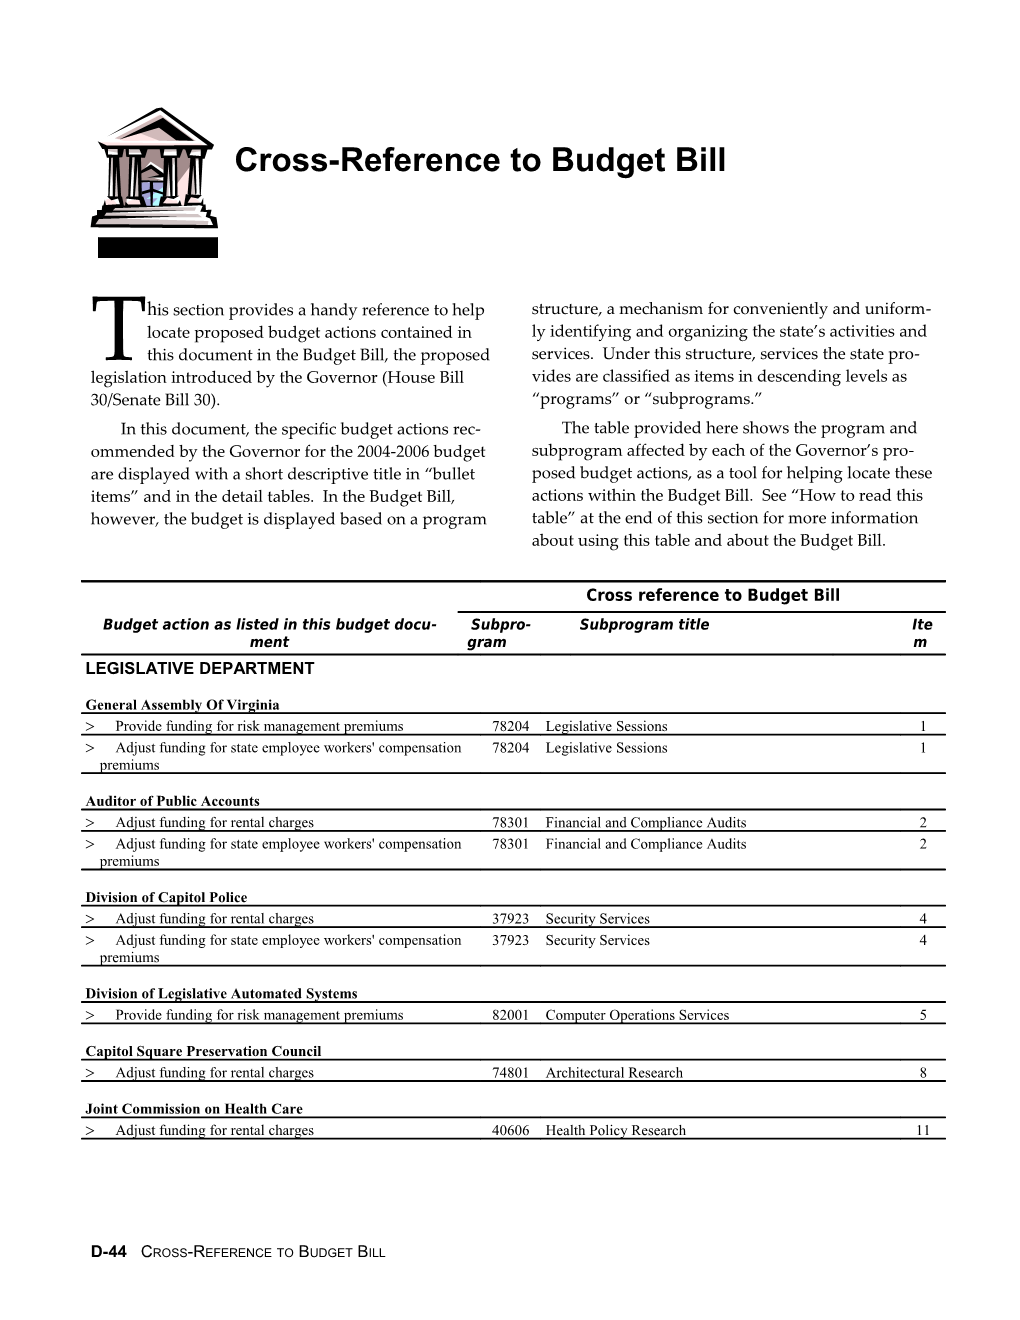 This Publication Describes the Governor'sproposed 1996-98 Biennial Budget for the Commonwealth s1